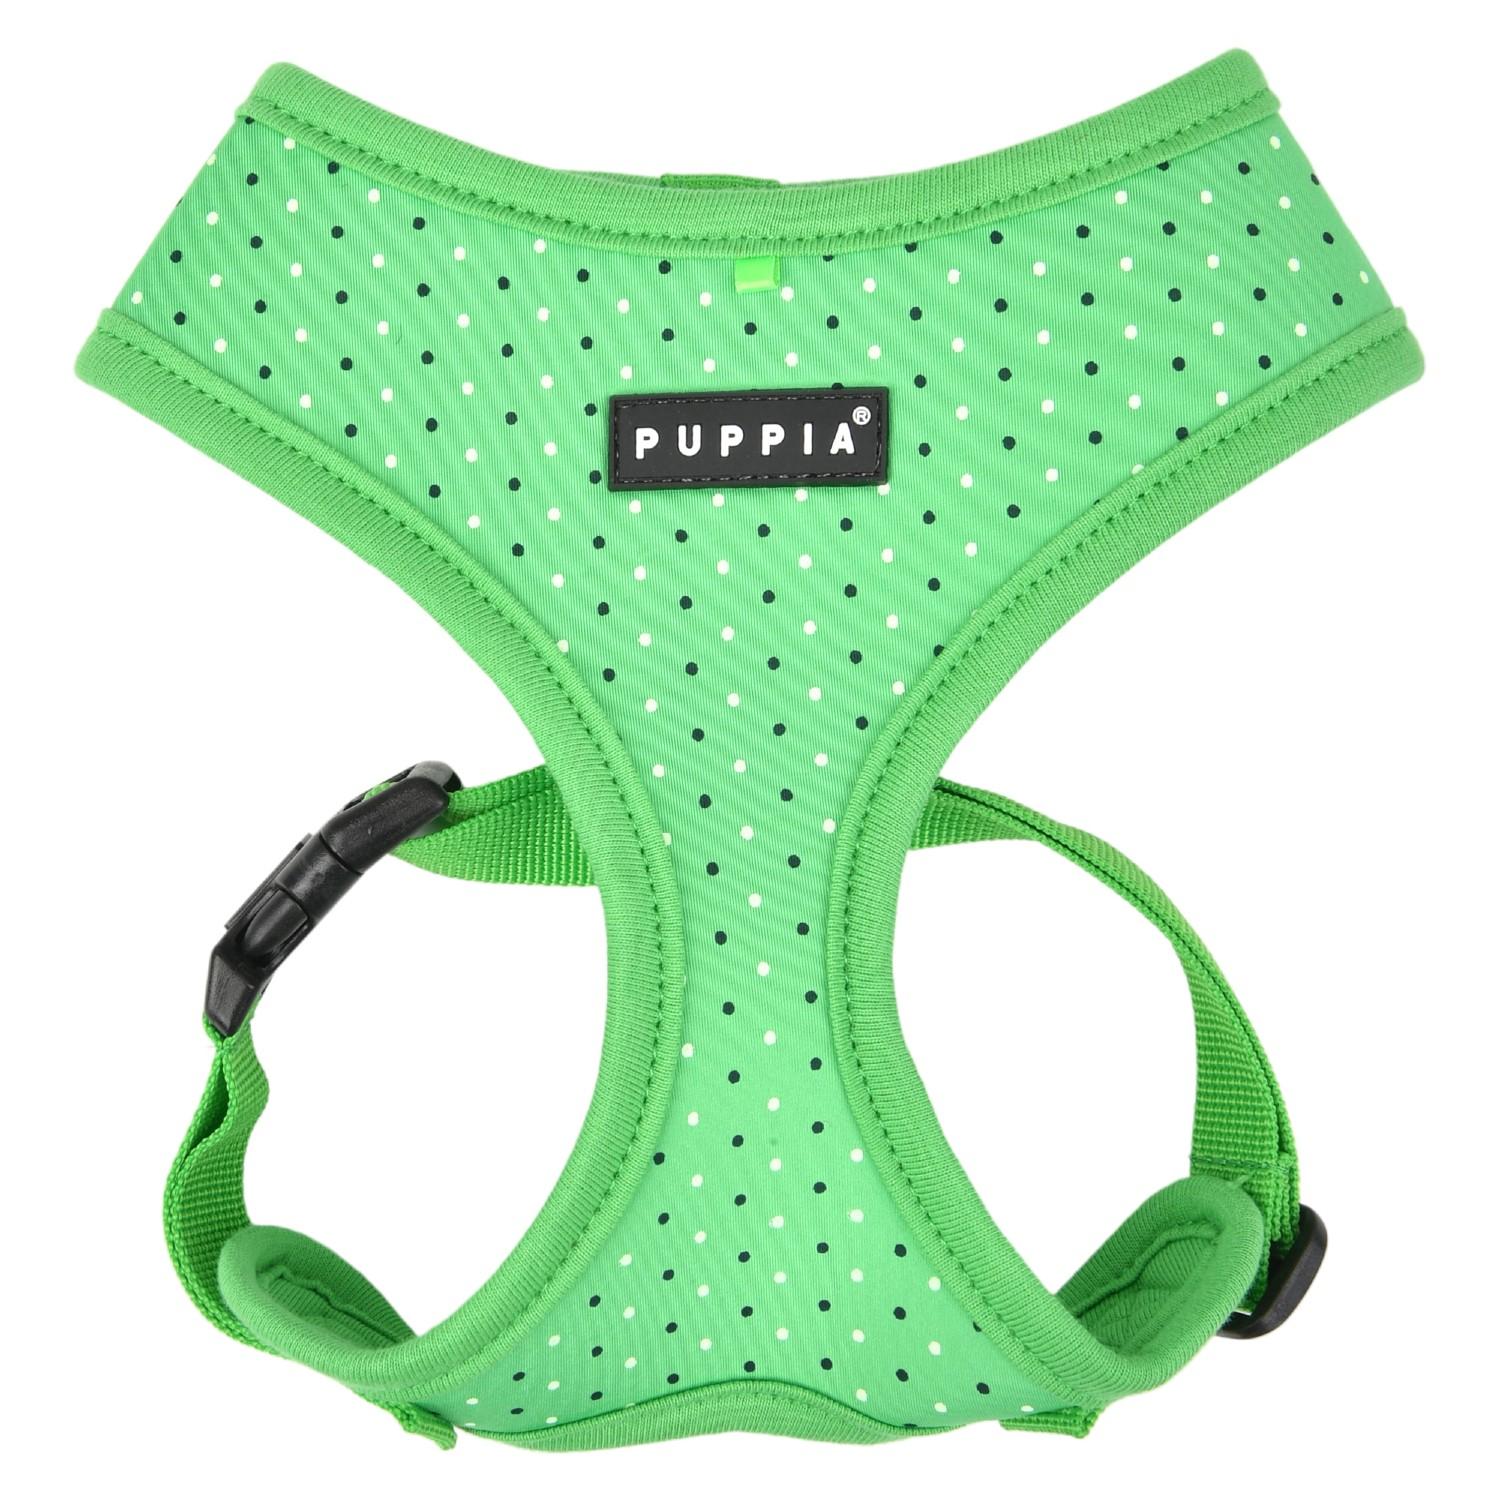 Bonnie Adjustable Dog Harness by Puppia - Green